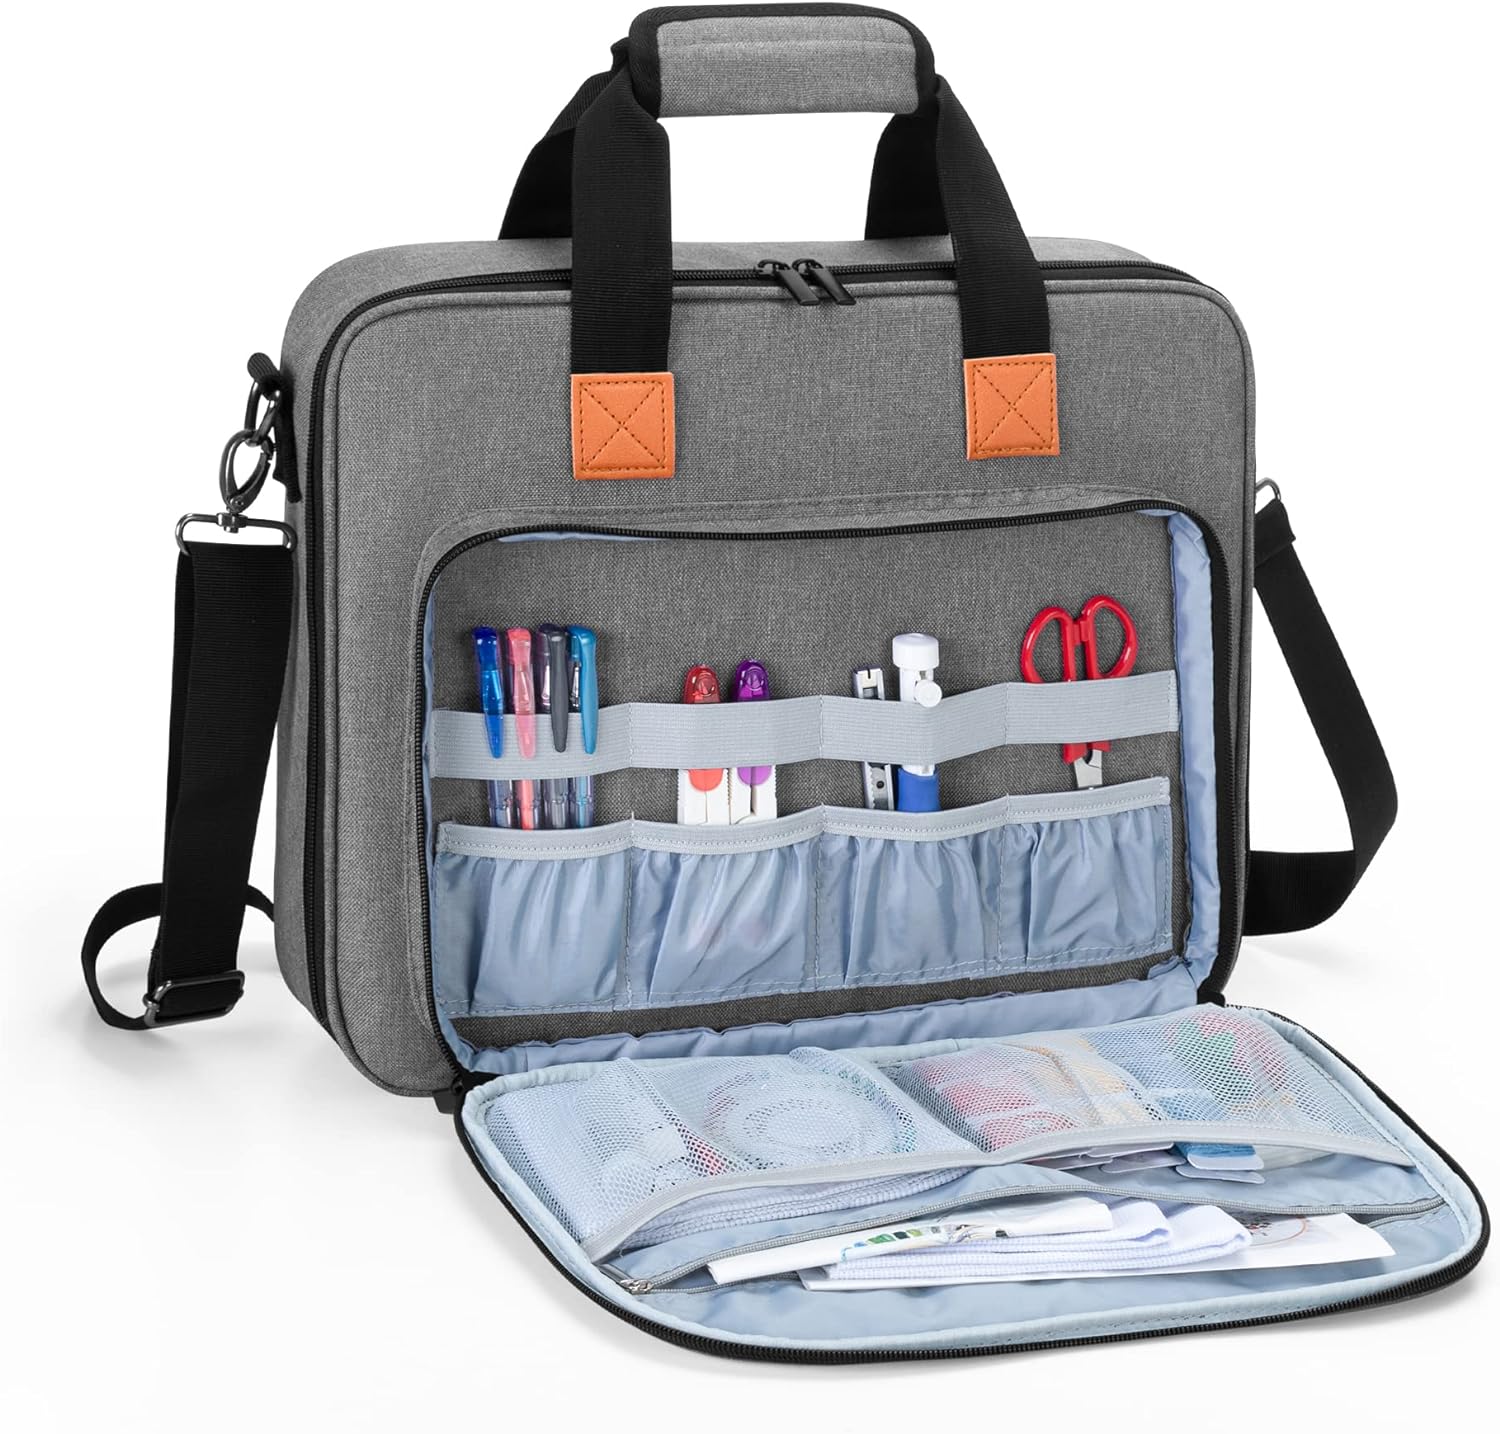 LUXJA Embroidery Project Bag, Embroidery Kits Storage Bag (Bag Only), Gray